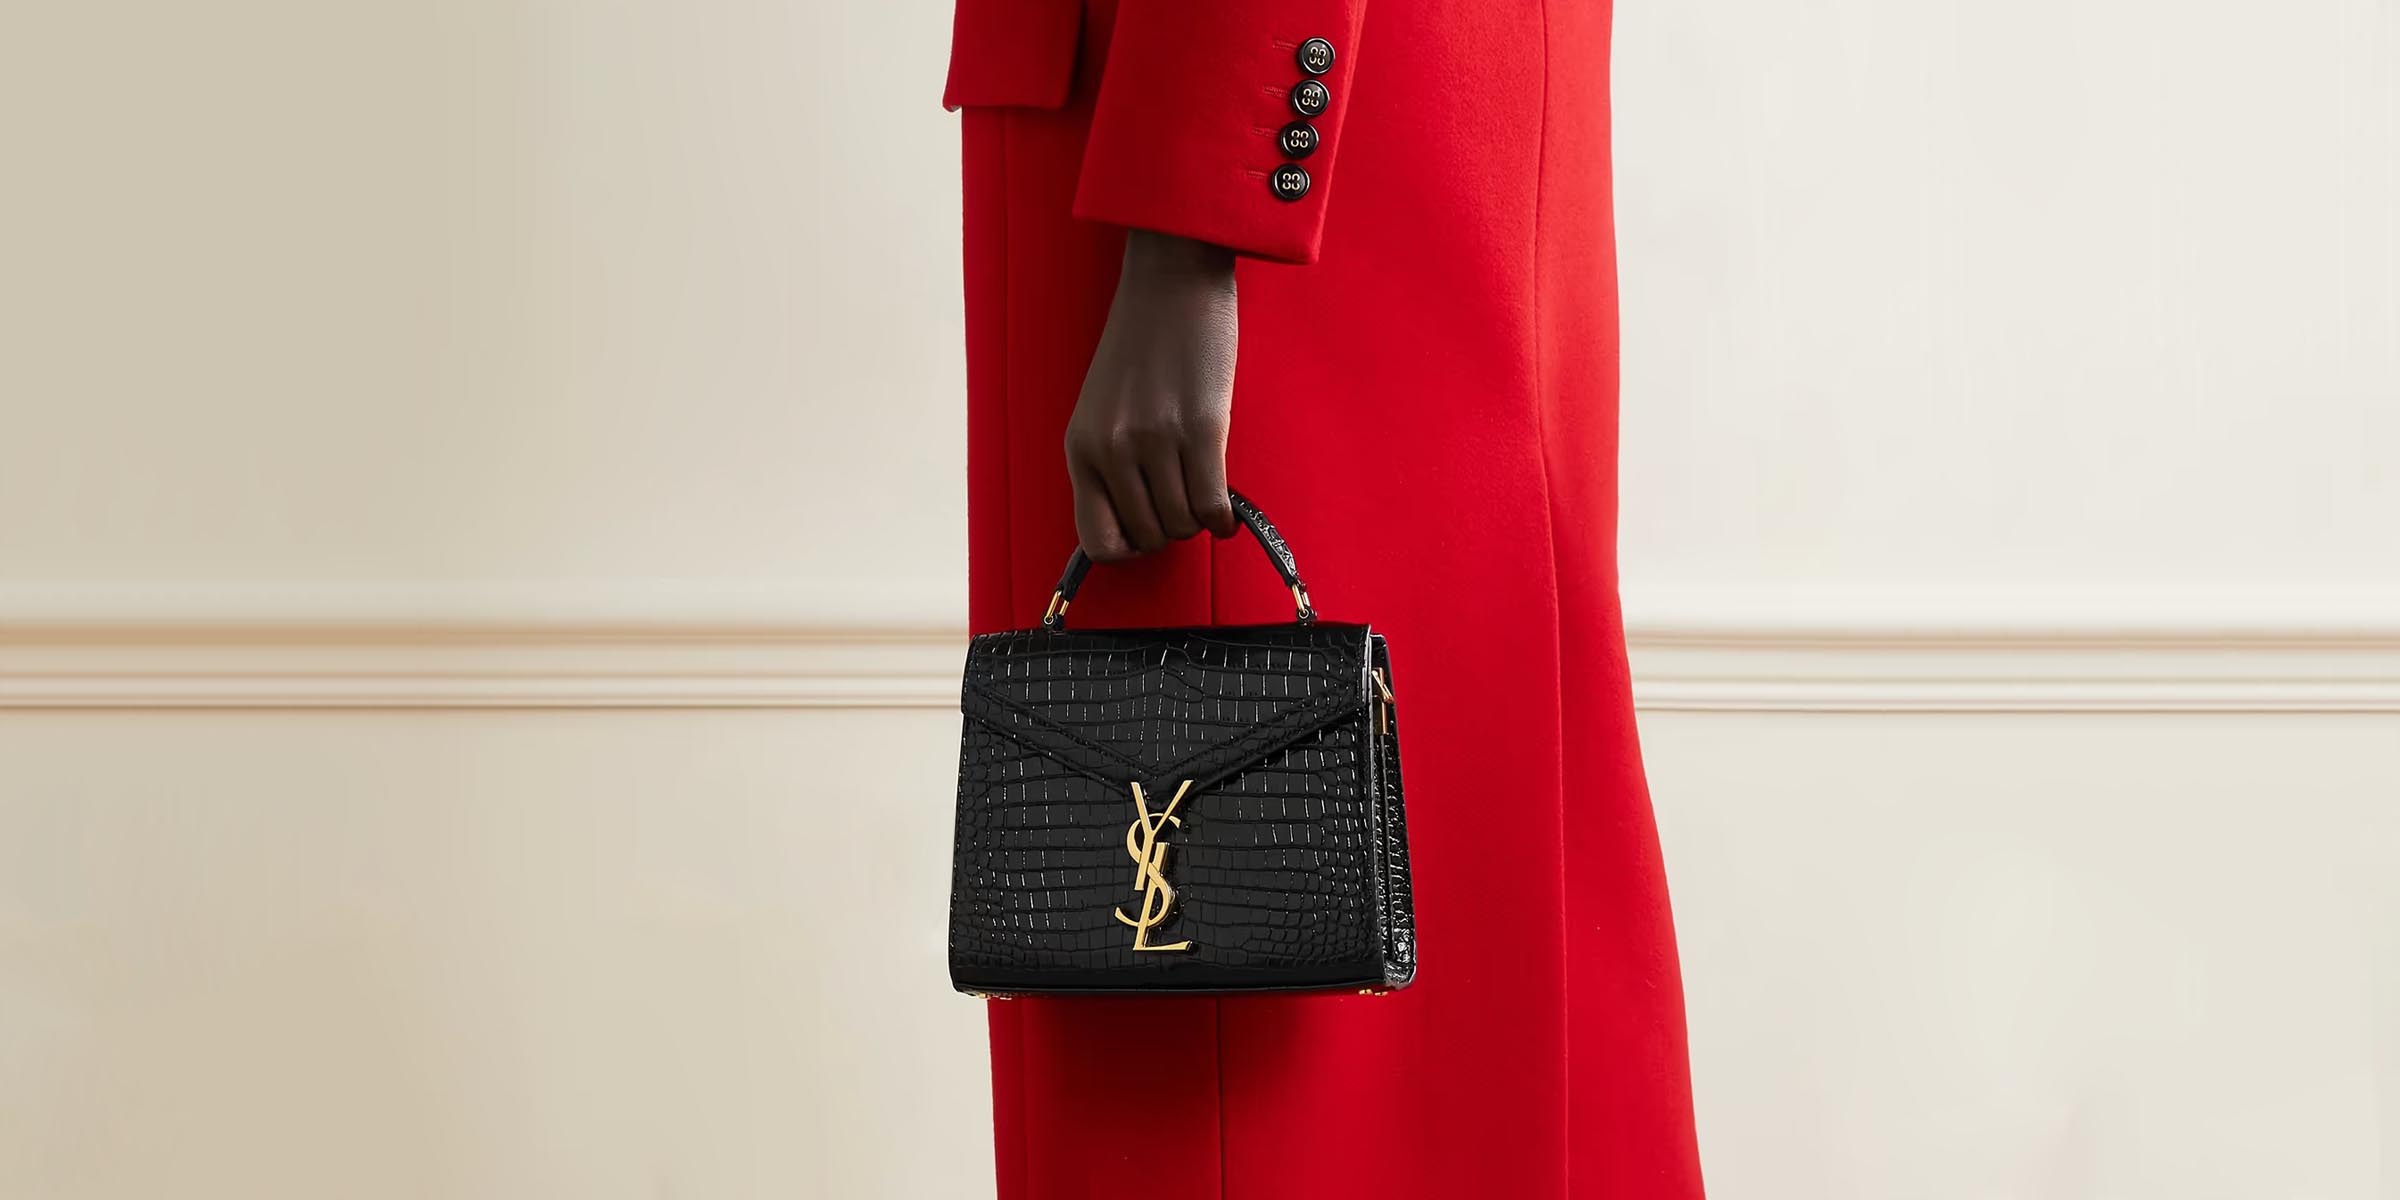 Crimson Couture: YSL Handbags Redefine Glamour in the World of Fashion